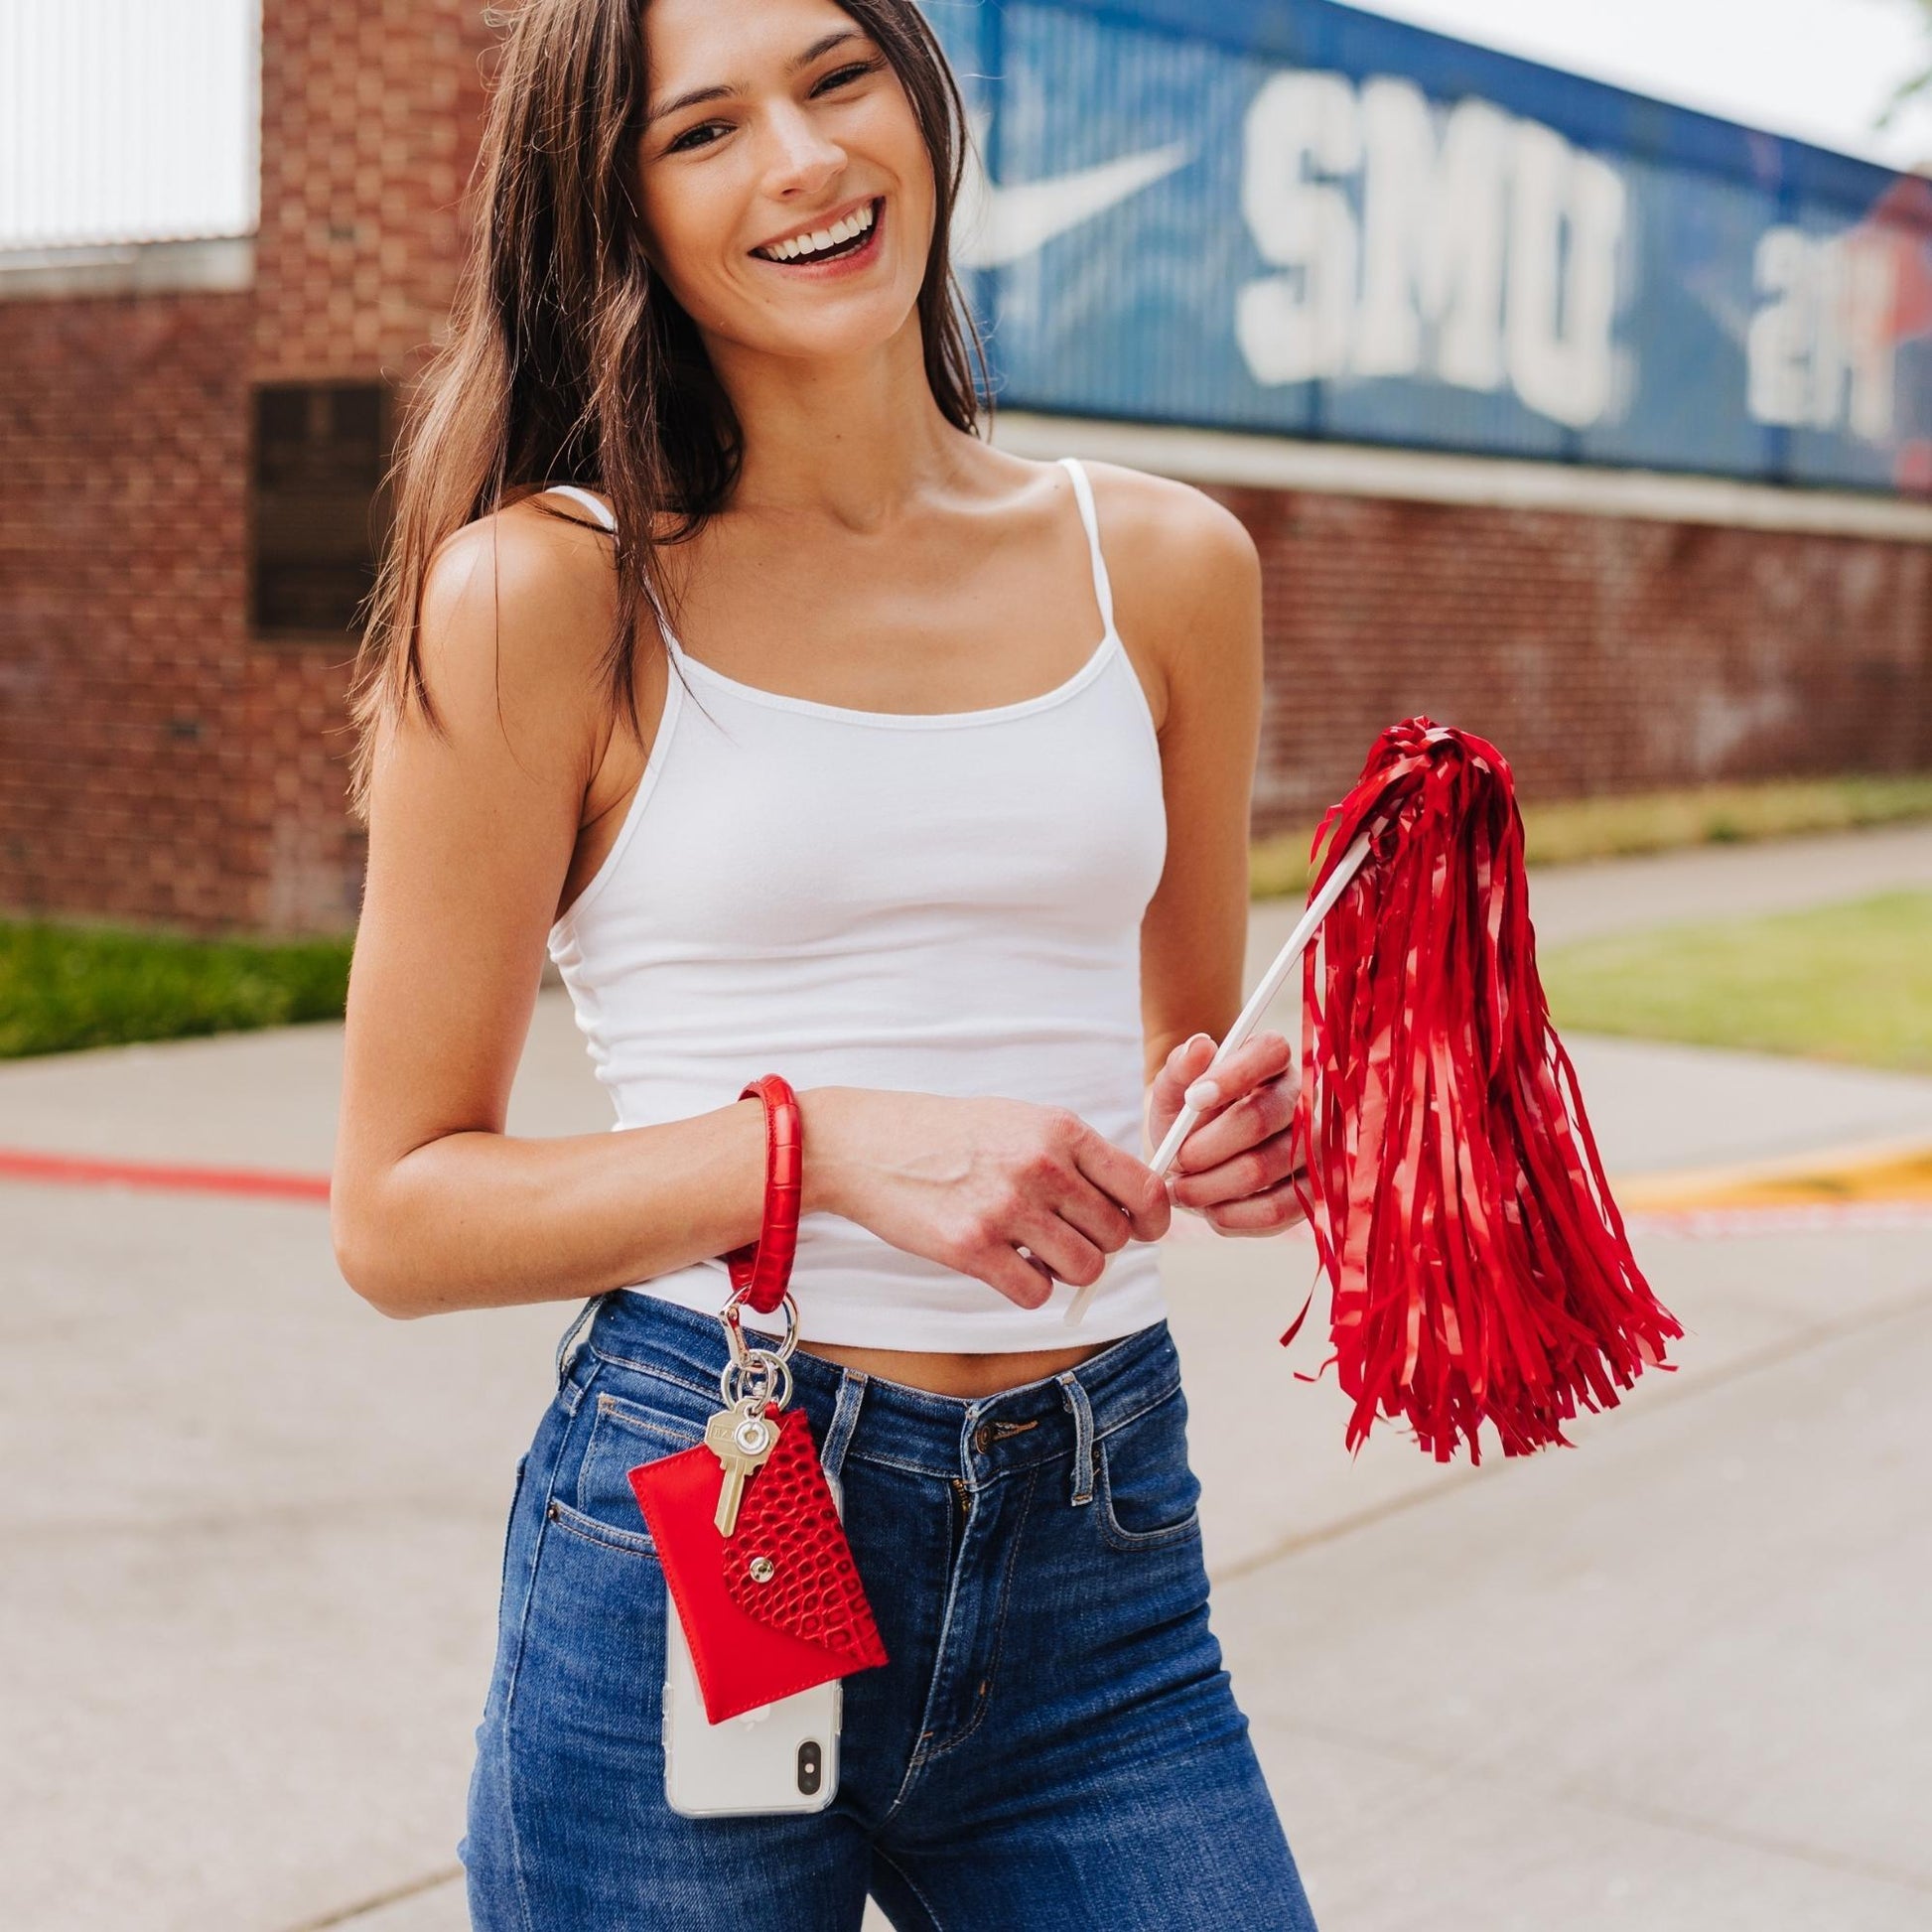 3-in-1 Cherry On Top Leather Mini Envelope Set - Oventure shown in game day style with a pom pom and a phone connector. All connected by the life hub Big O Key Ring.